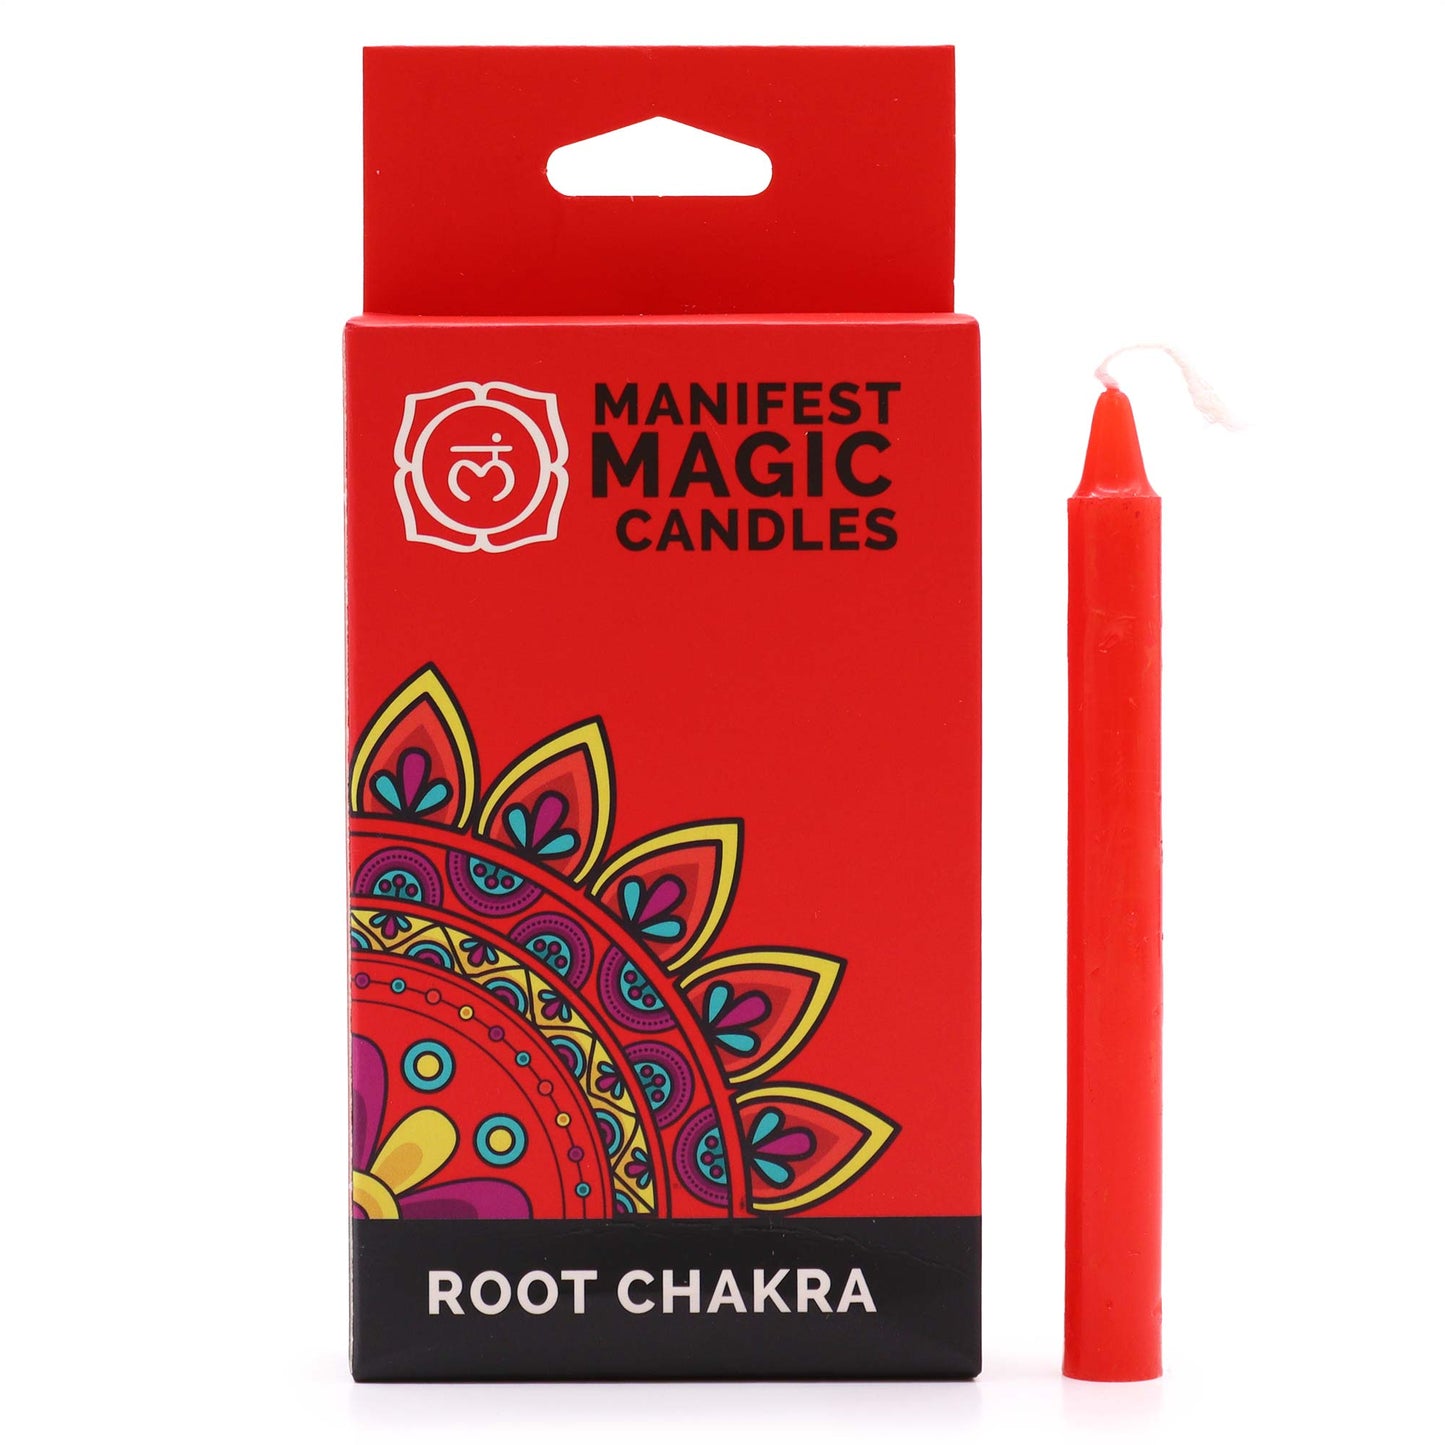 Manifest Magic Candles (pack of 12) - Red - Root Chakra - Kaftans direct